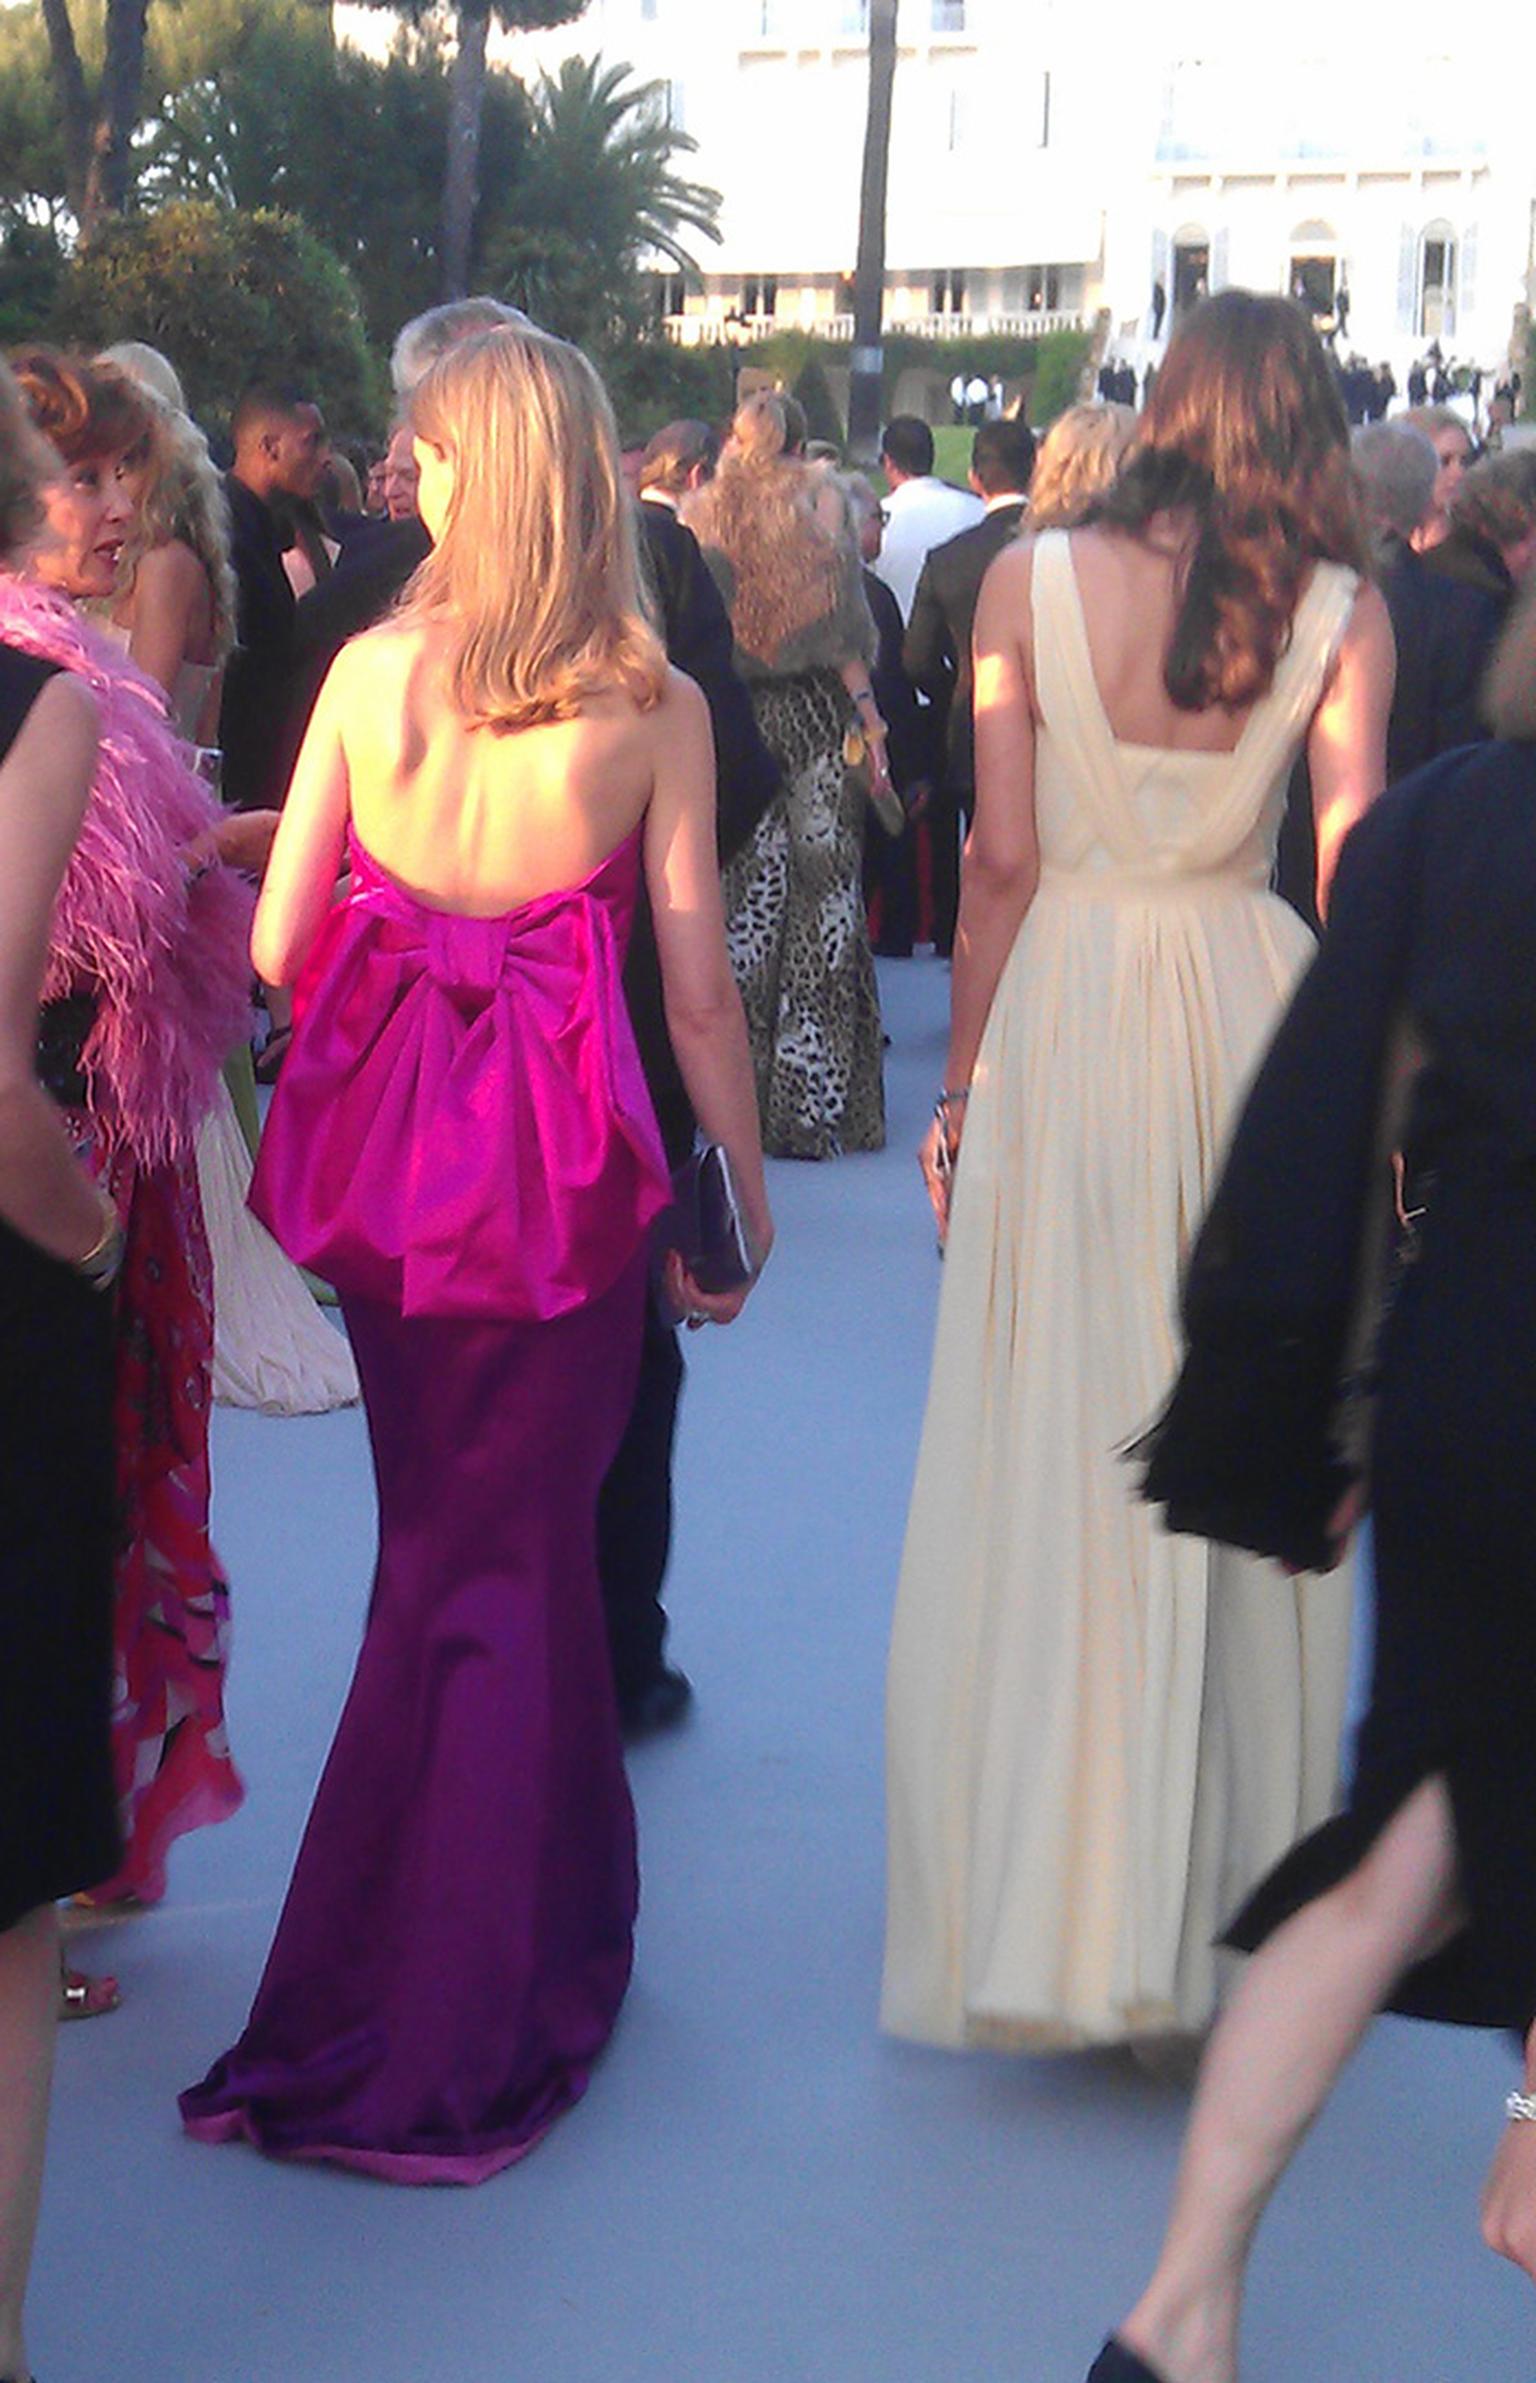 Beautiful-Gowns-and-ladies-at-AmfAR.jpg